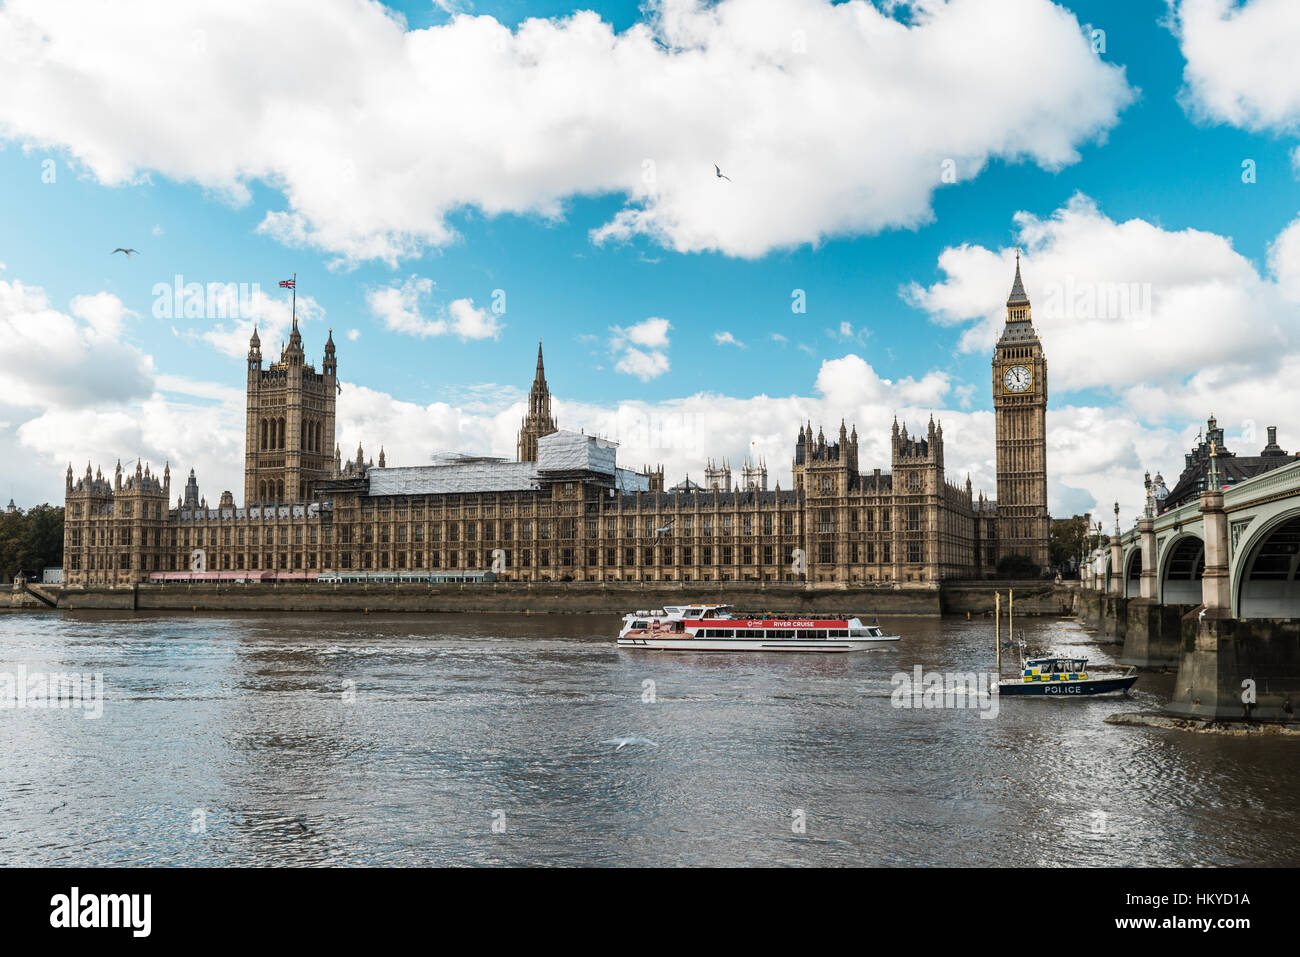 London, Vereinigtes Königreich - 18. Oktober 2016: Palace of Westminster oder House Of Commons und des House Of Lords. Parlament in London, Großbritannien Stockfoto